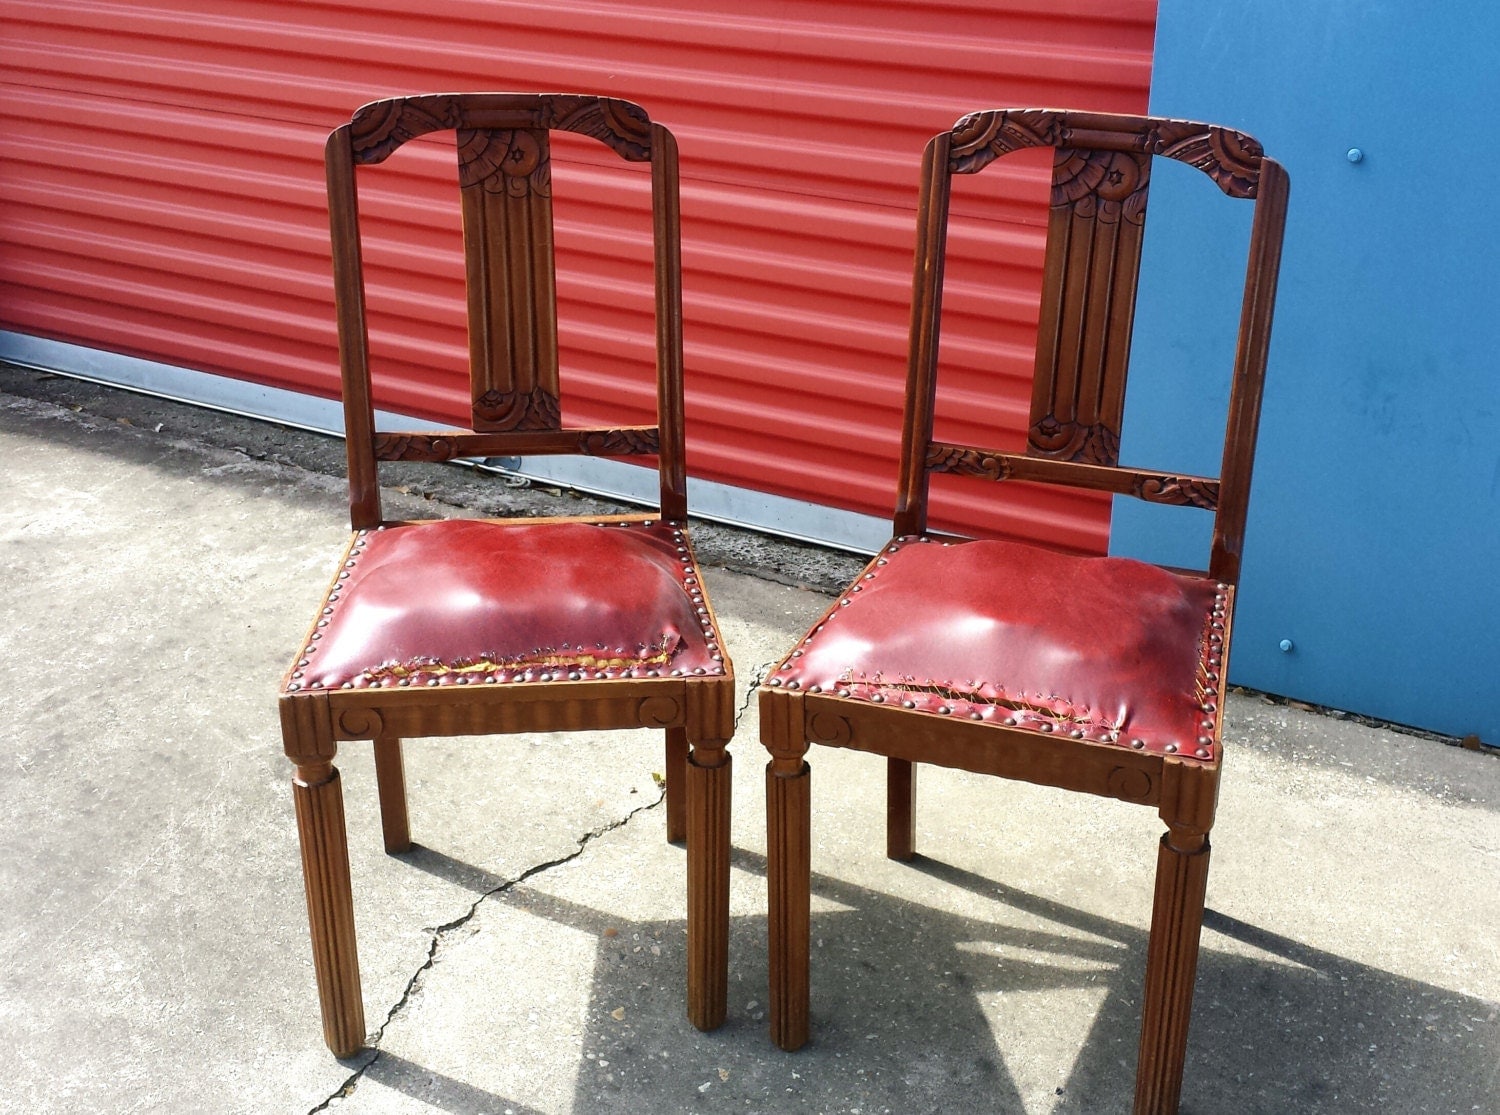 Rare Antique Hand Carved Spanish Colonial Chairs (set of 2